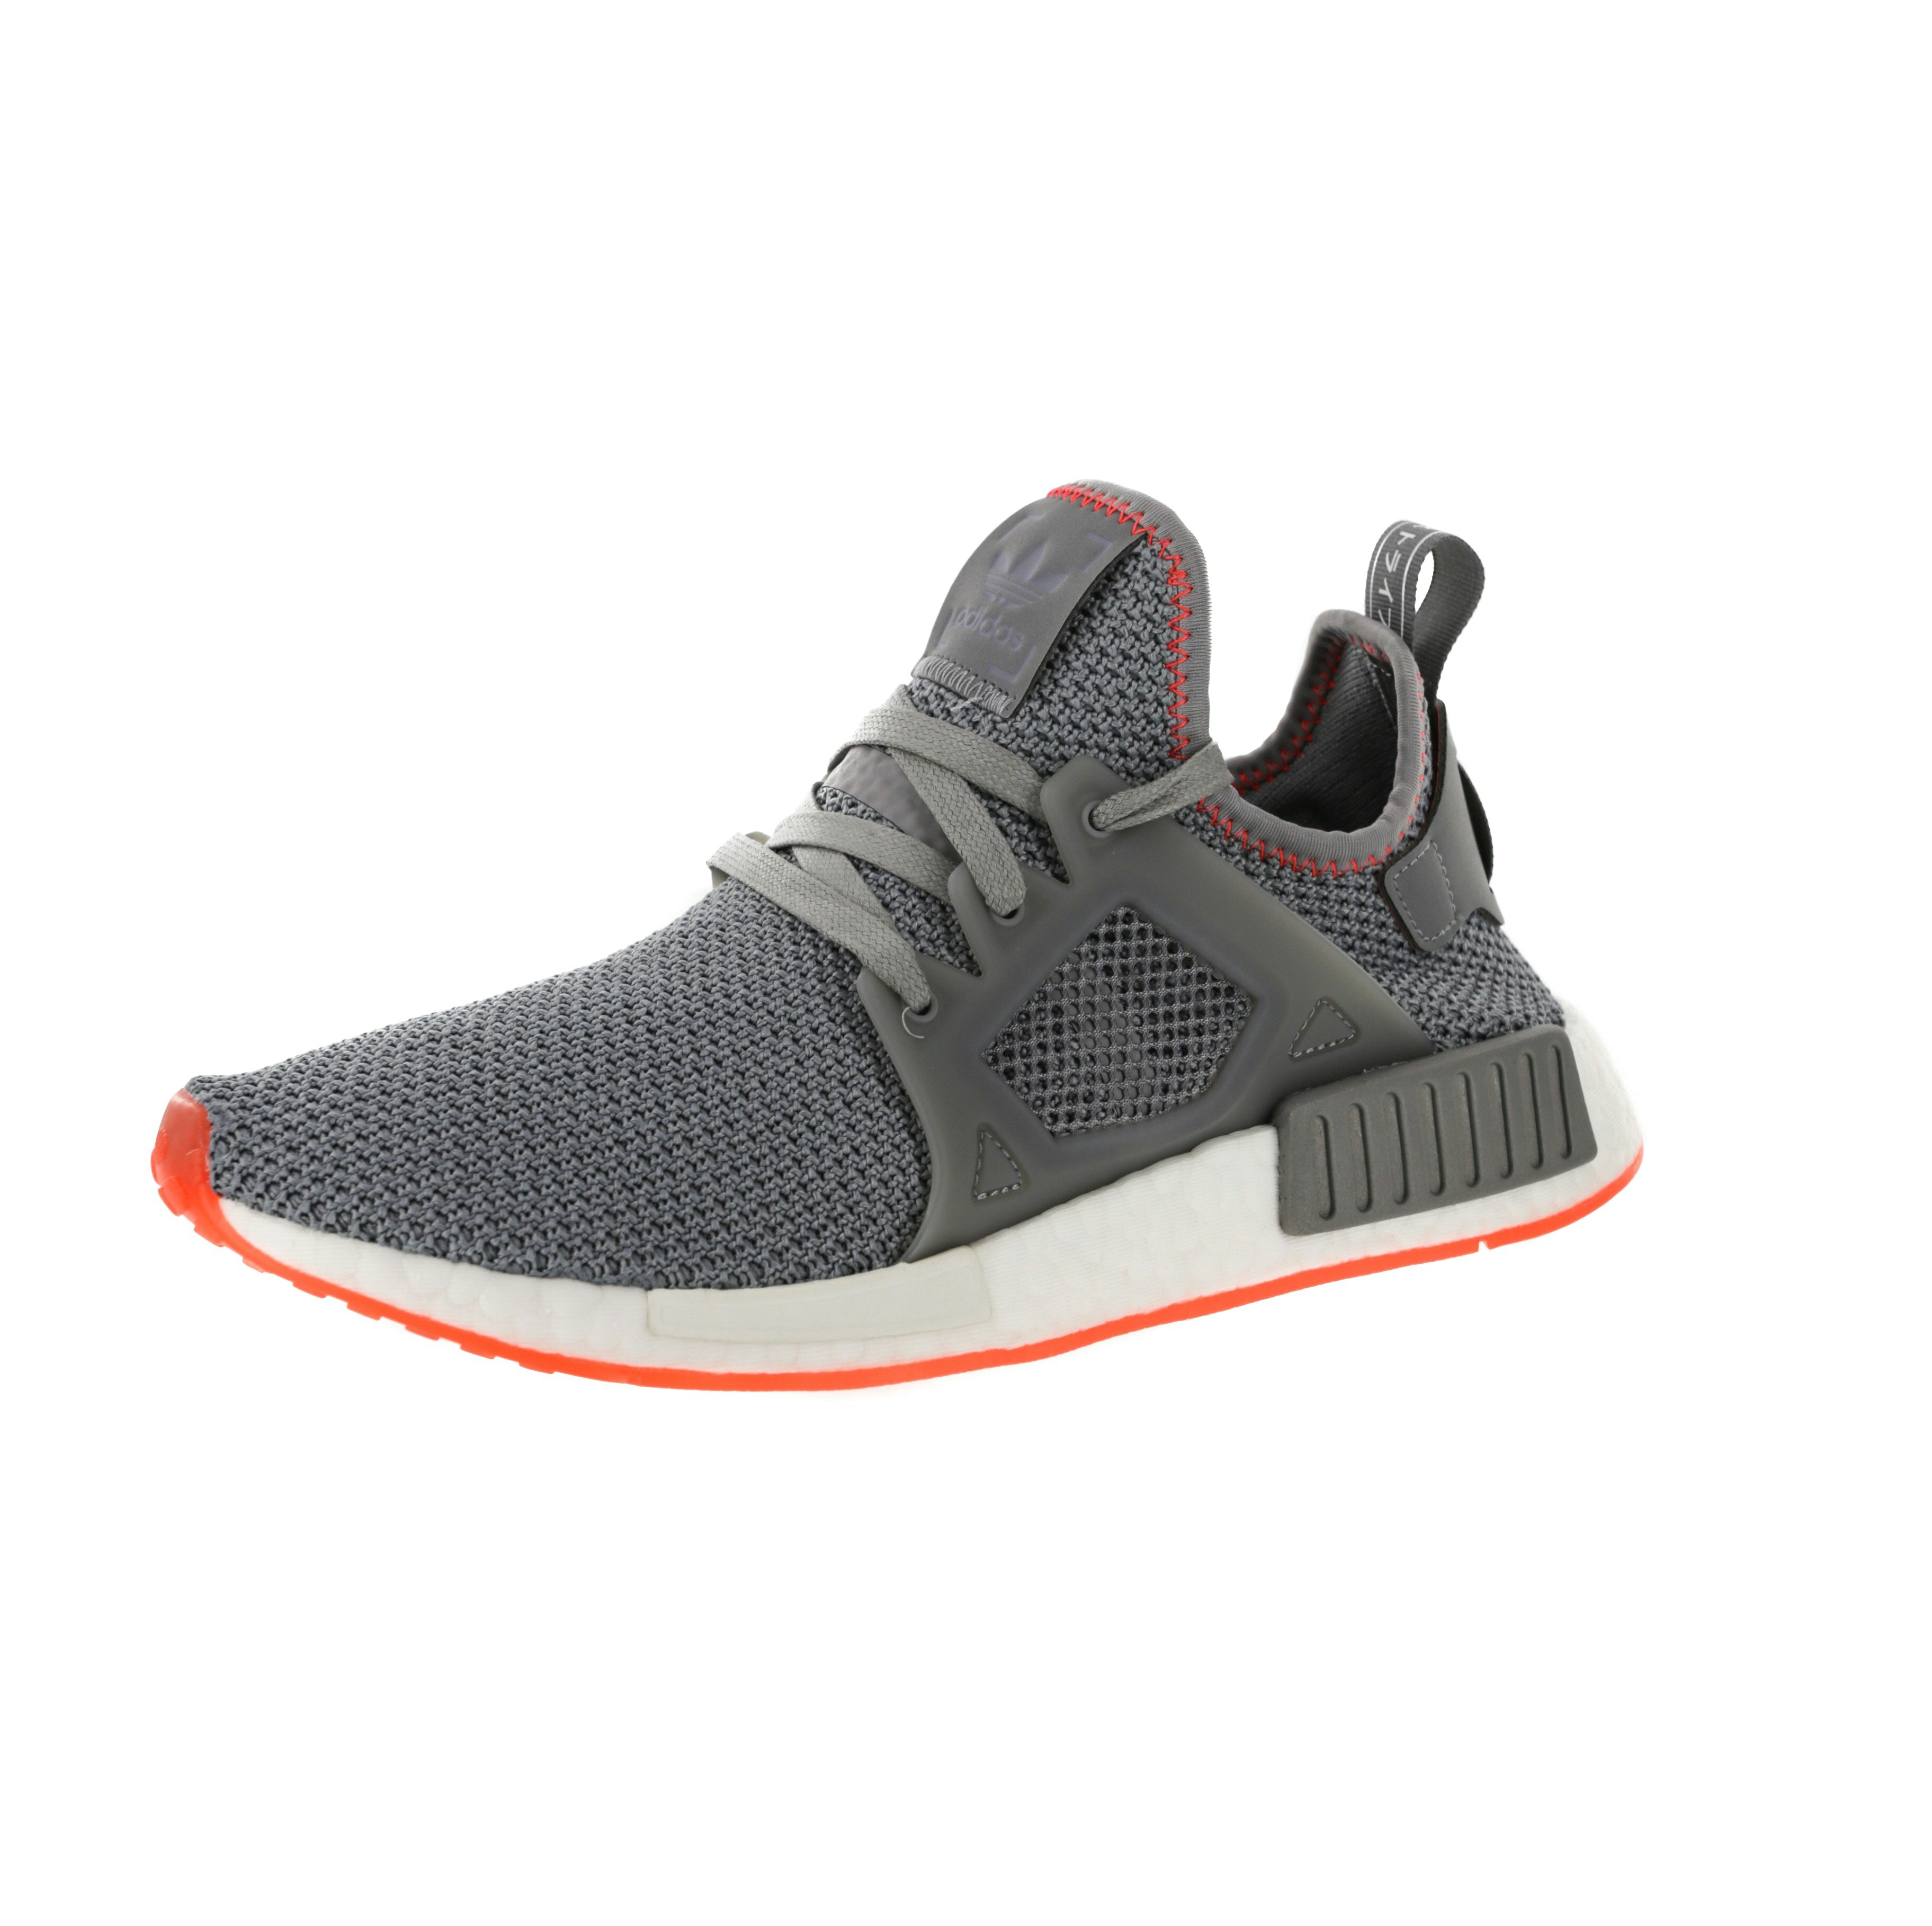 Adidas NMD XR1 Low Top Athletic Shoes for Men for Sal.